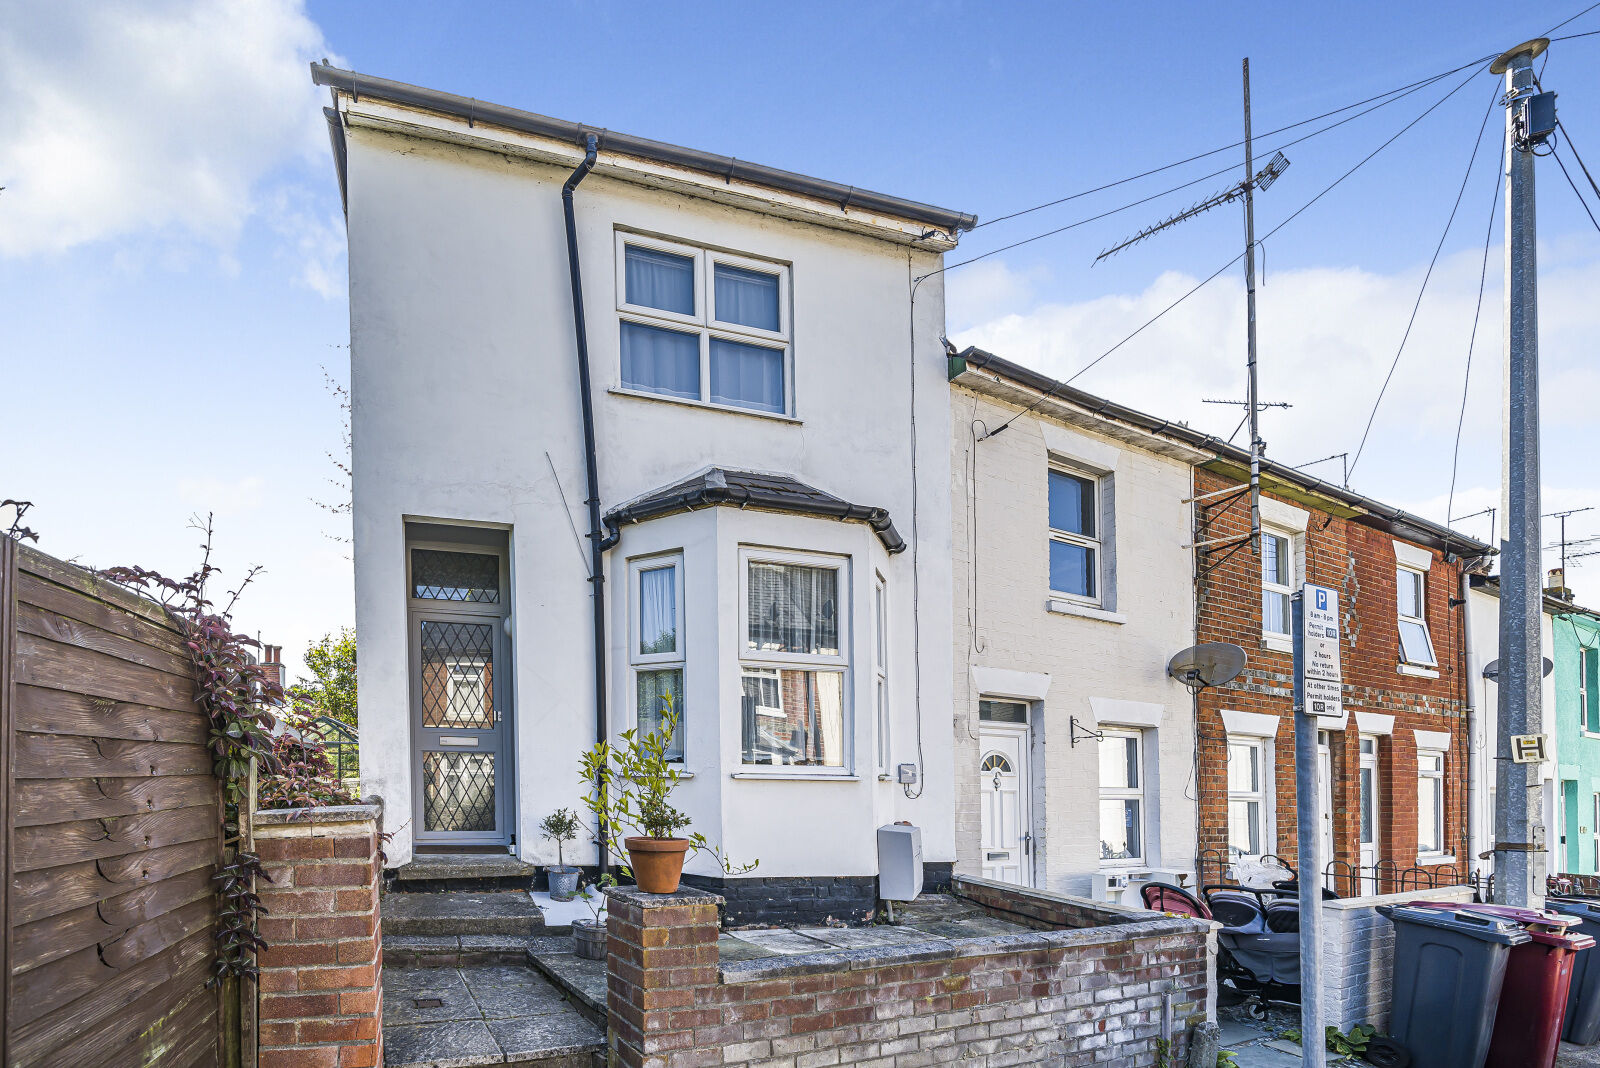 2 bedroom end terraced house for sale Hill Street, Reading, RG1, main image